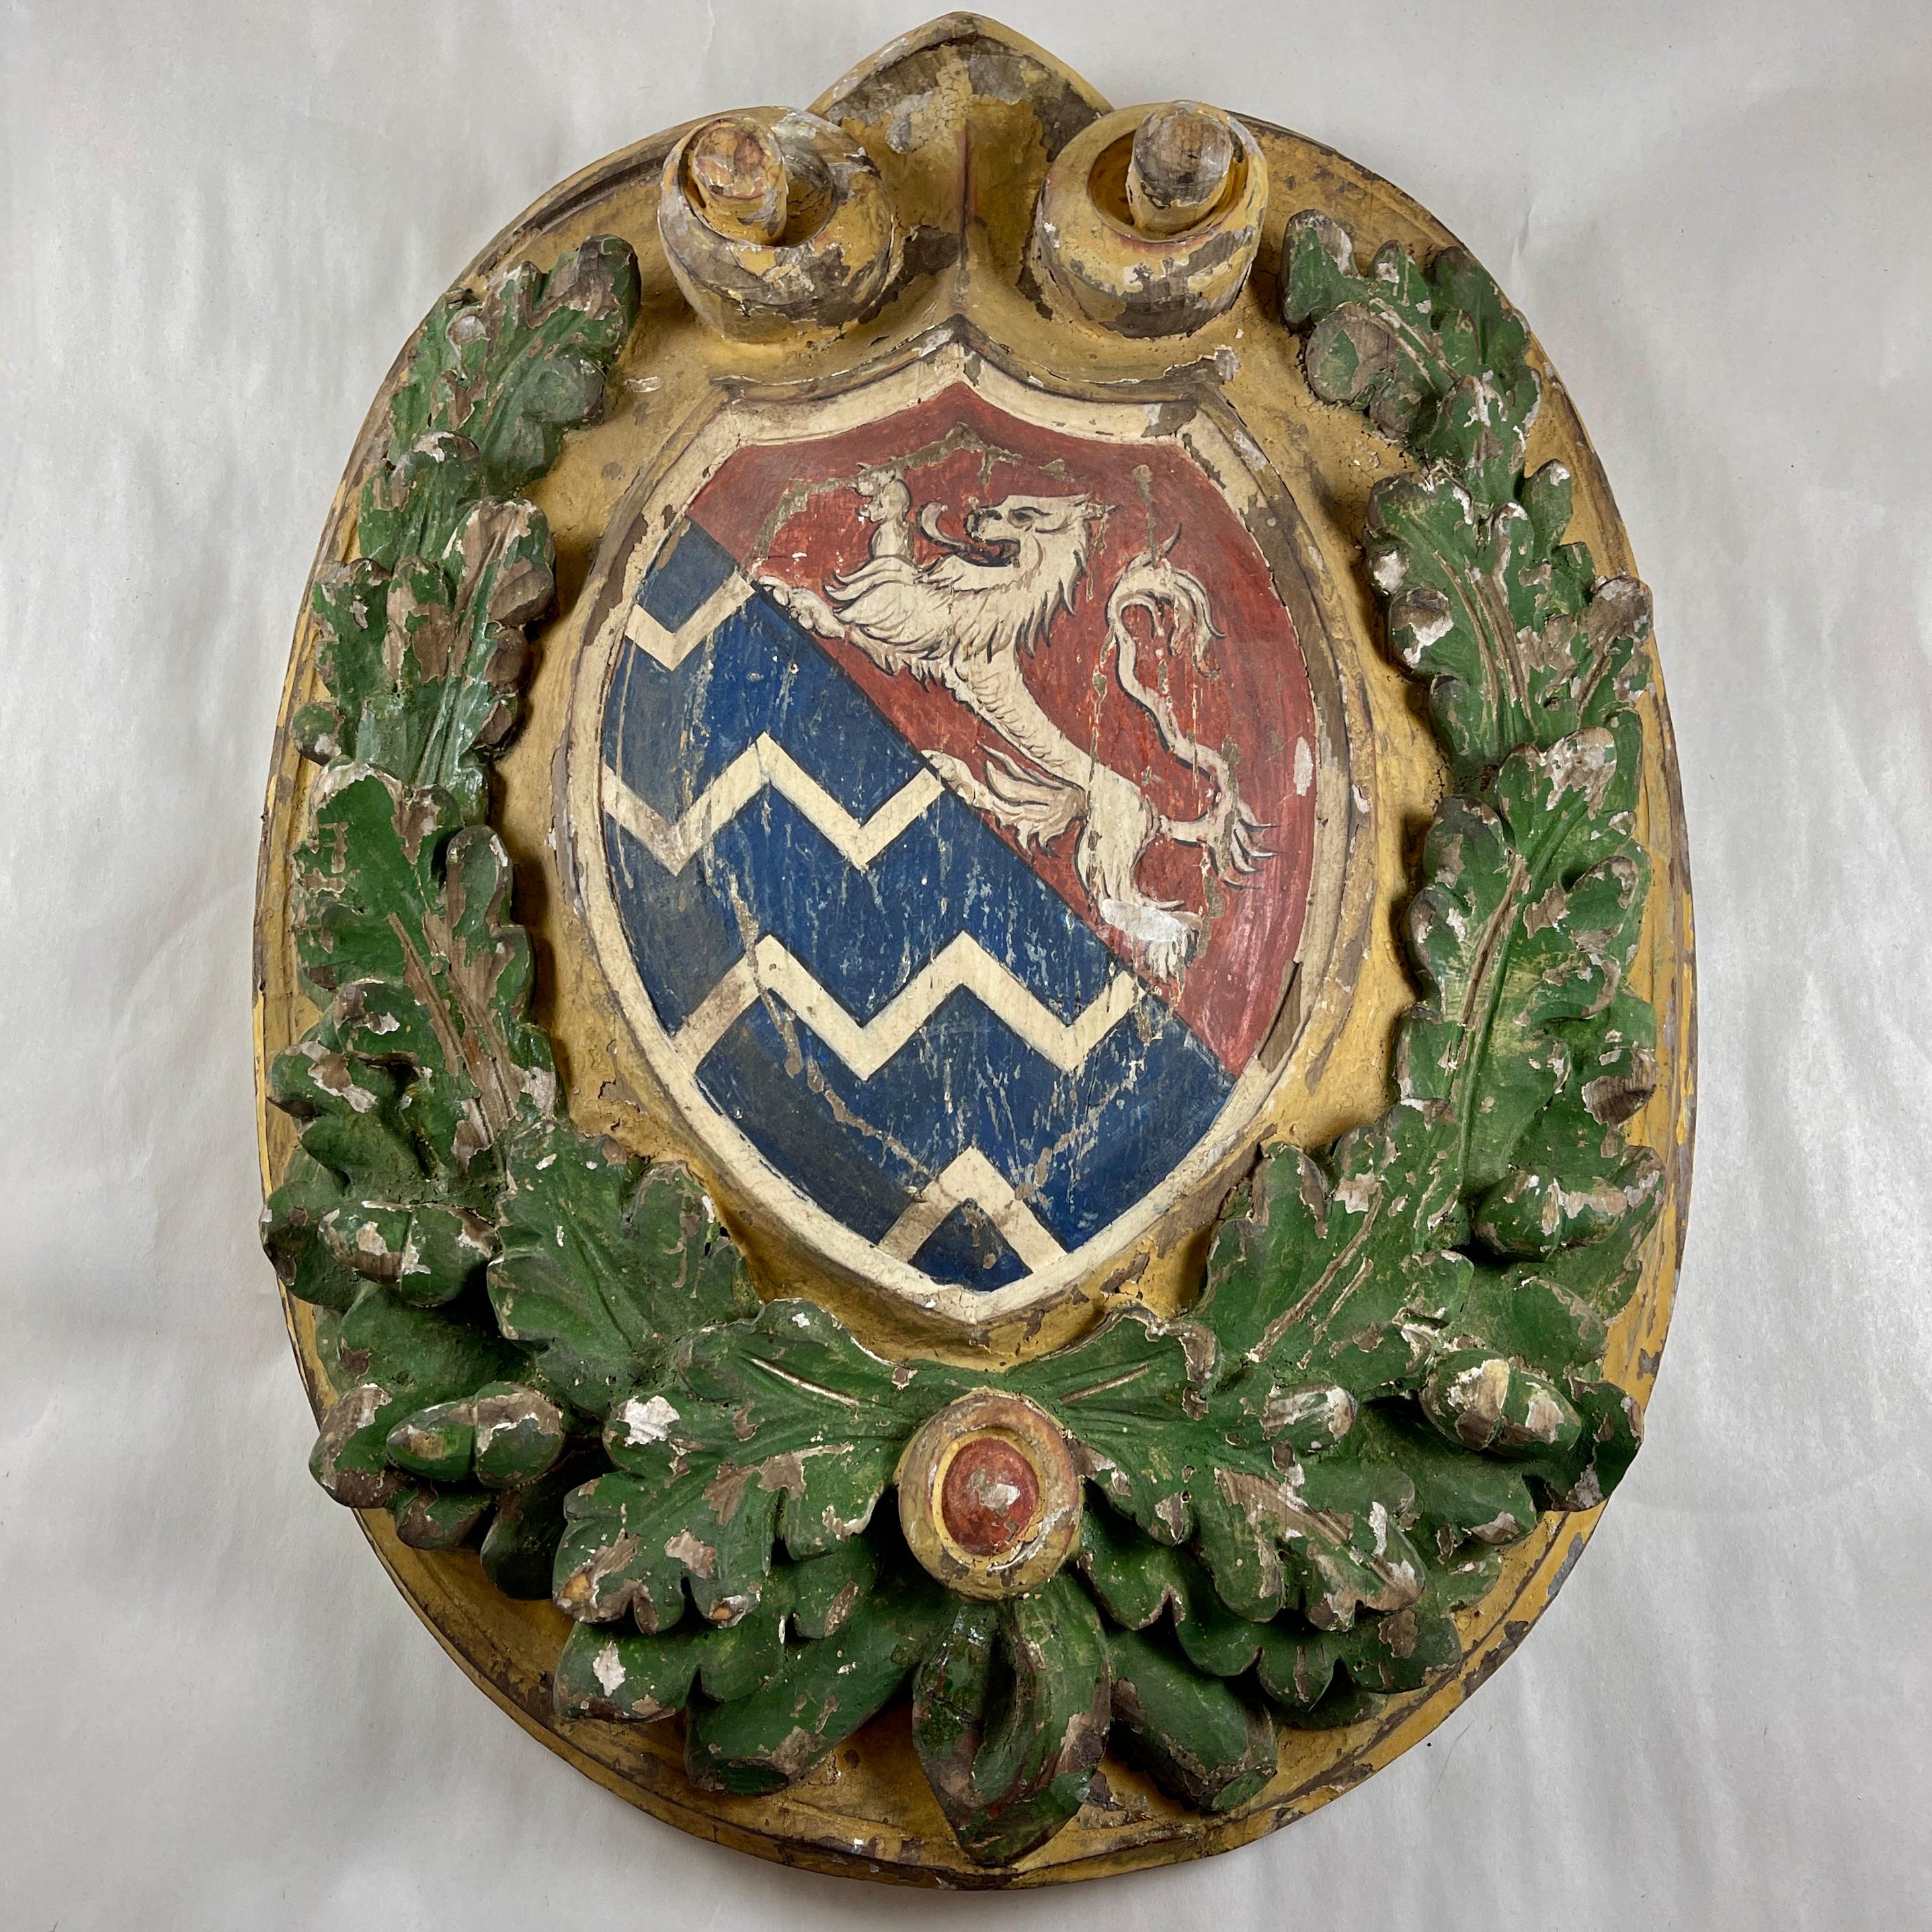 From Italy, in the Renaissance Revival style, a carved and painted wooden plaque with crest, circa 1870s.

A unique piece, carved and painted by hand, showing a Heraldic Crest against a bed of raised green oak leaves with acorns, on a scrolled